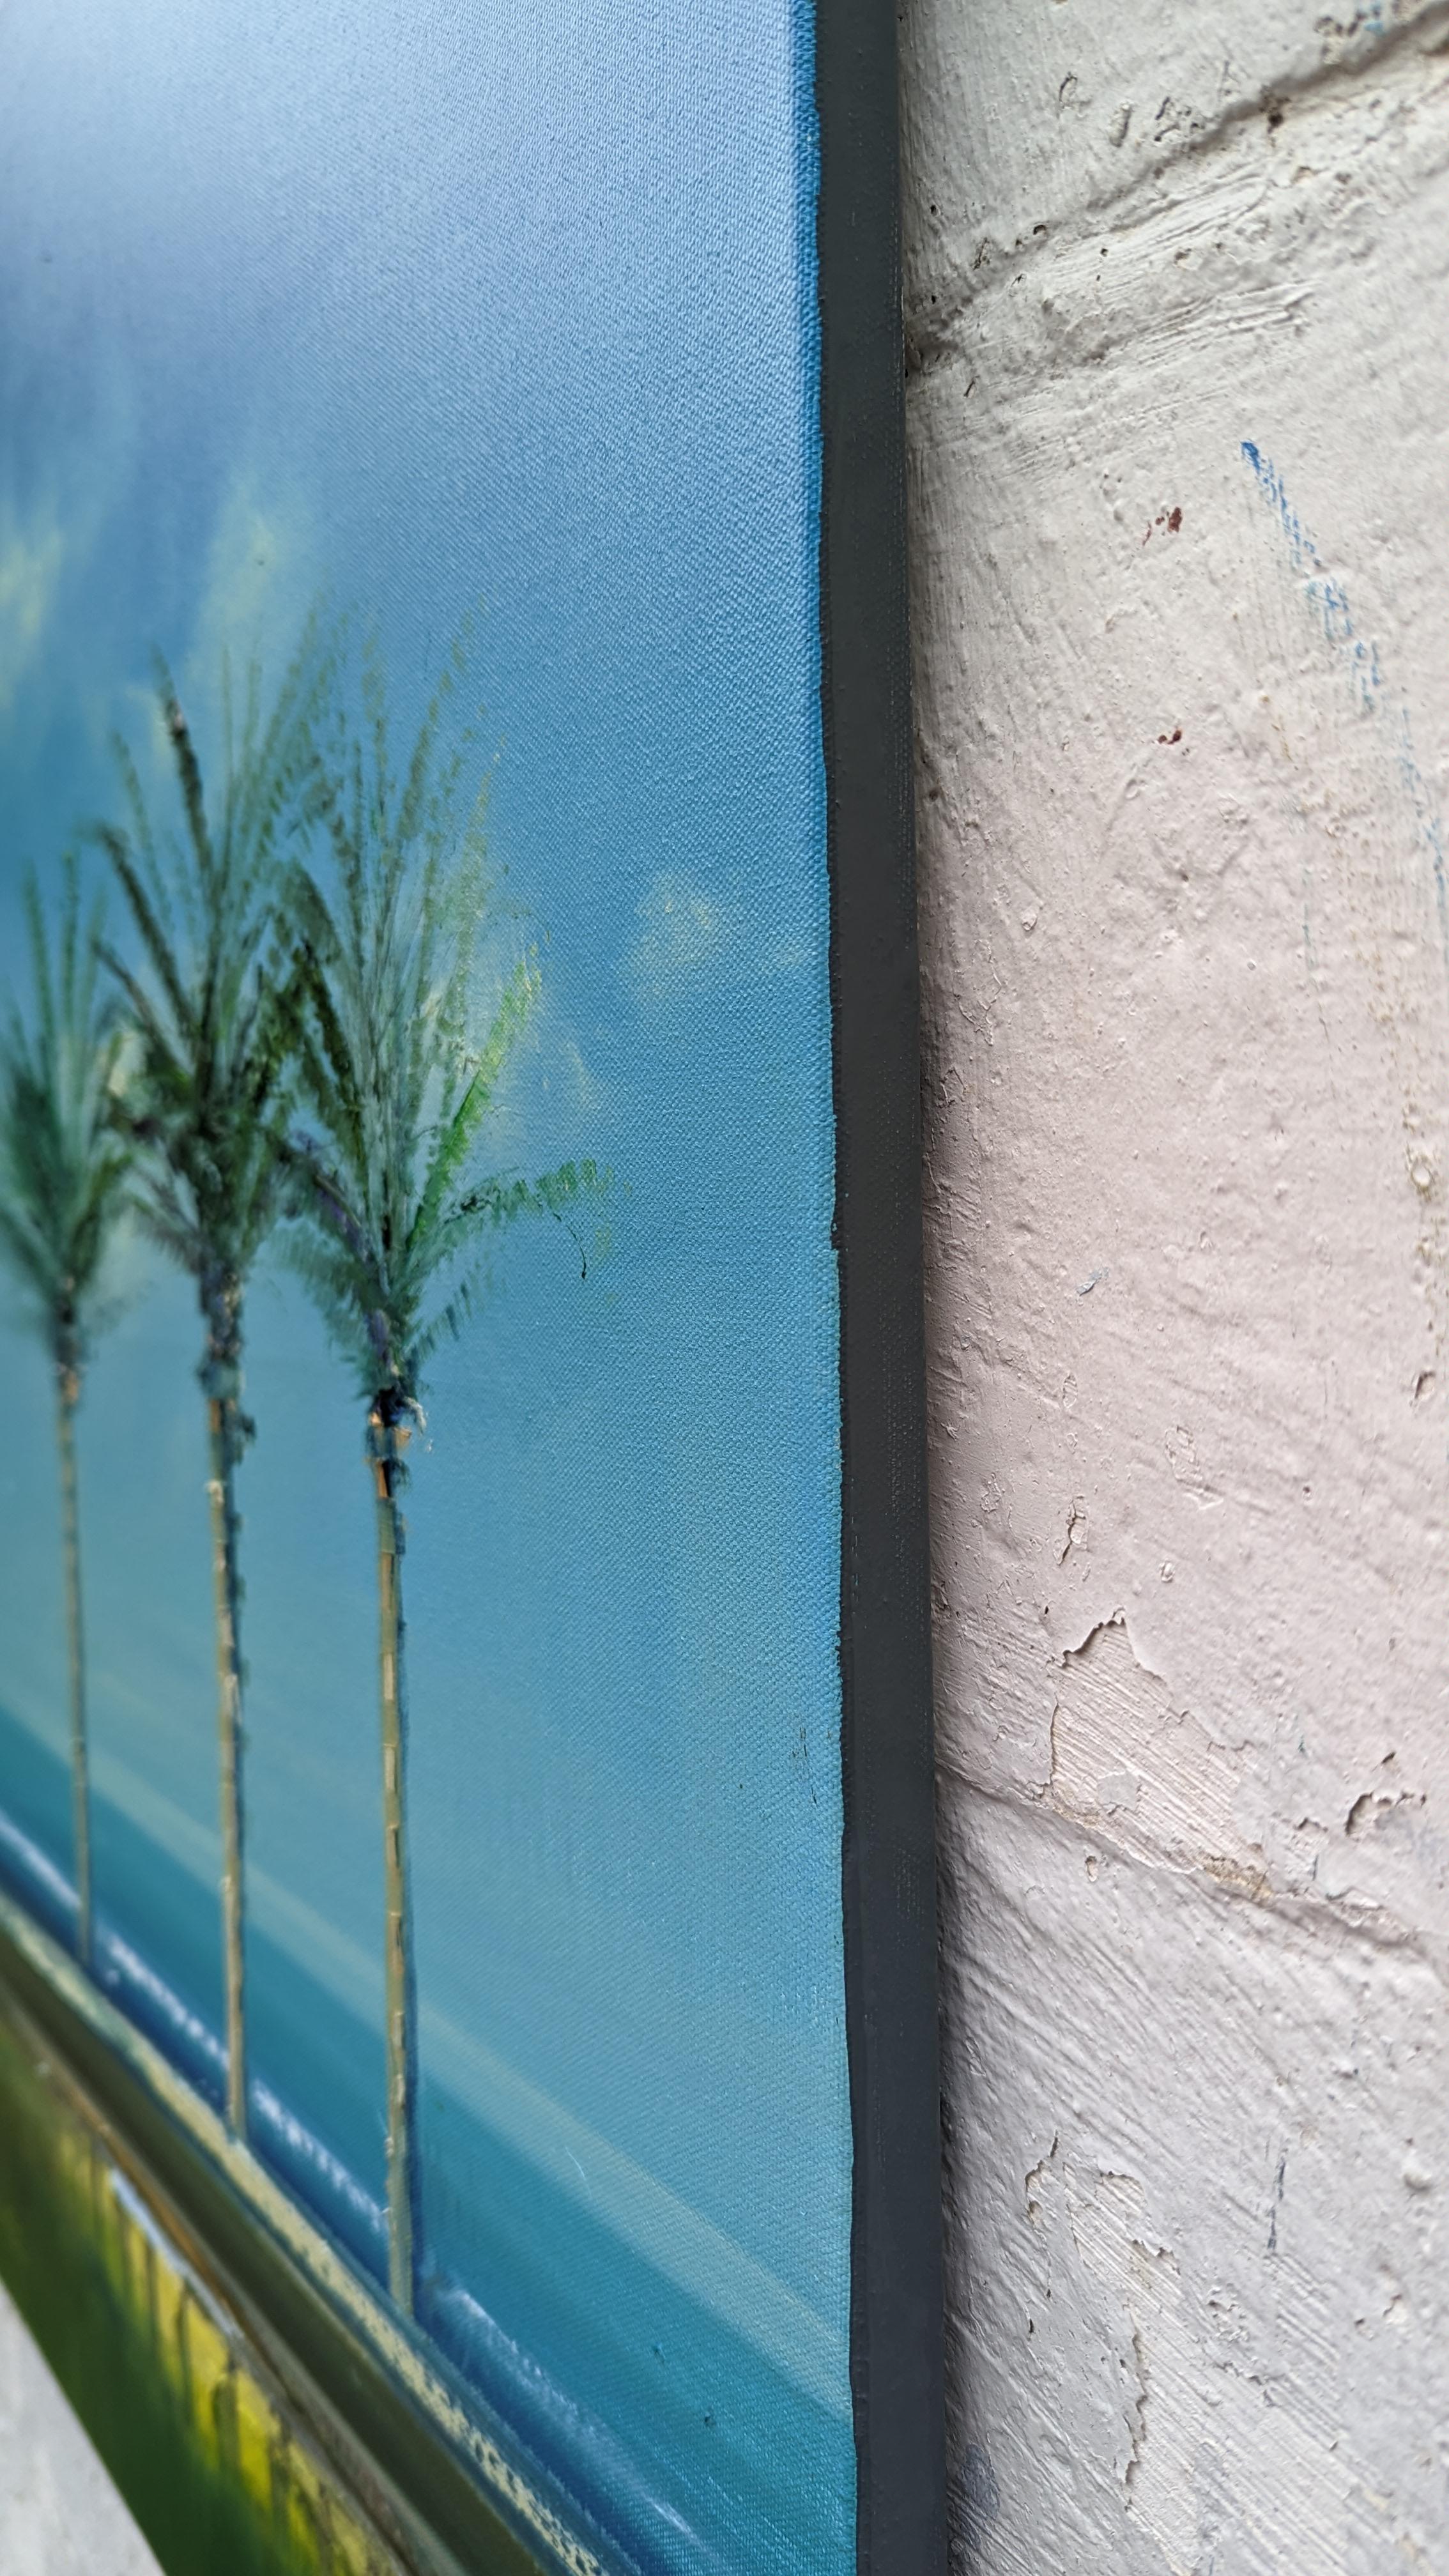 <p>Artist Comments<br>Artist George Peebles exhibits palm trees overlooking the Caribbean. He captures the relaxed scene with an impressionist approach. Fresh blue waters drift to the shore rhythmically as light glistens on the waves. 